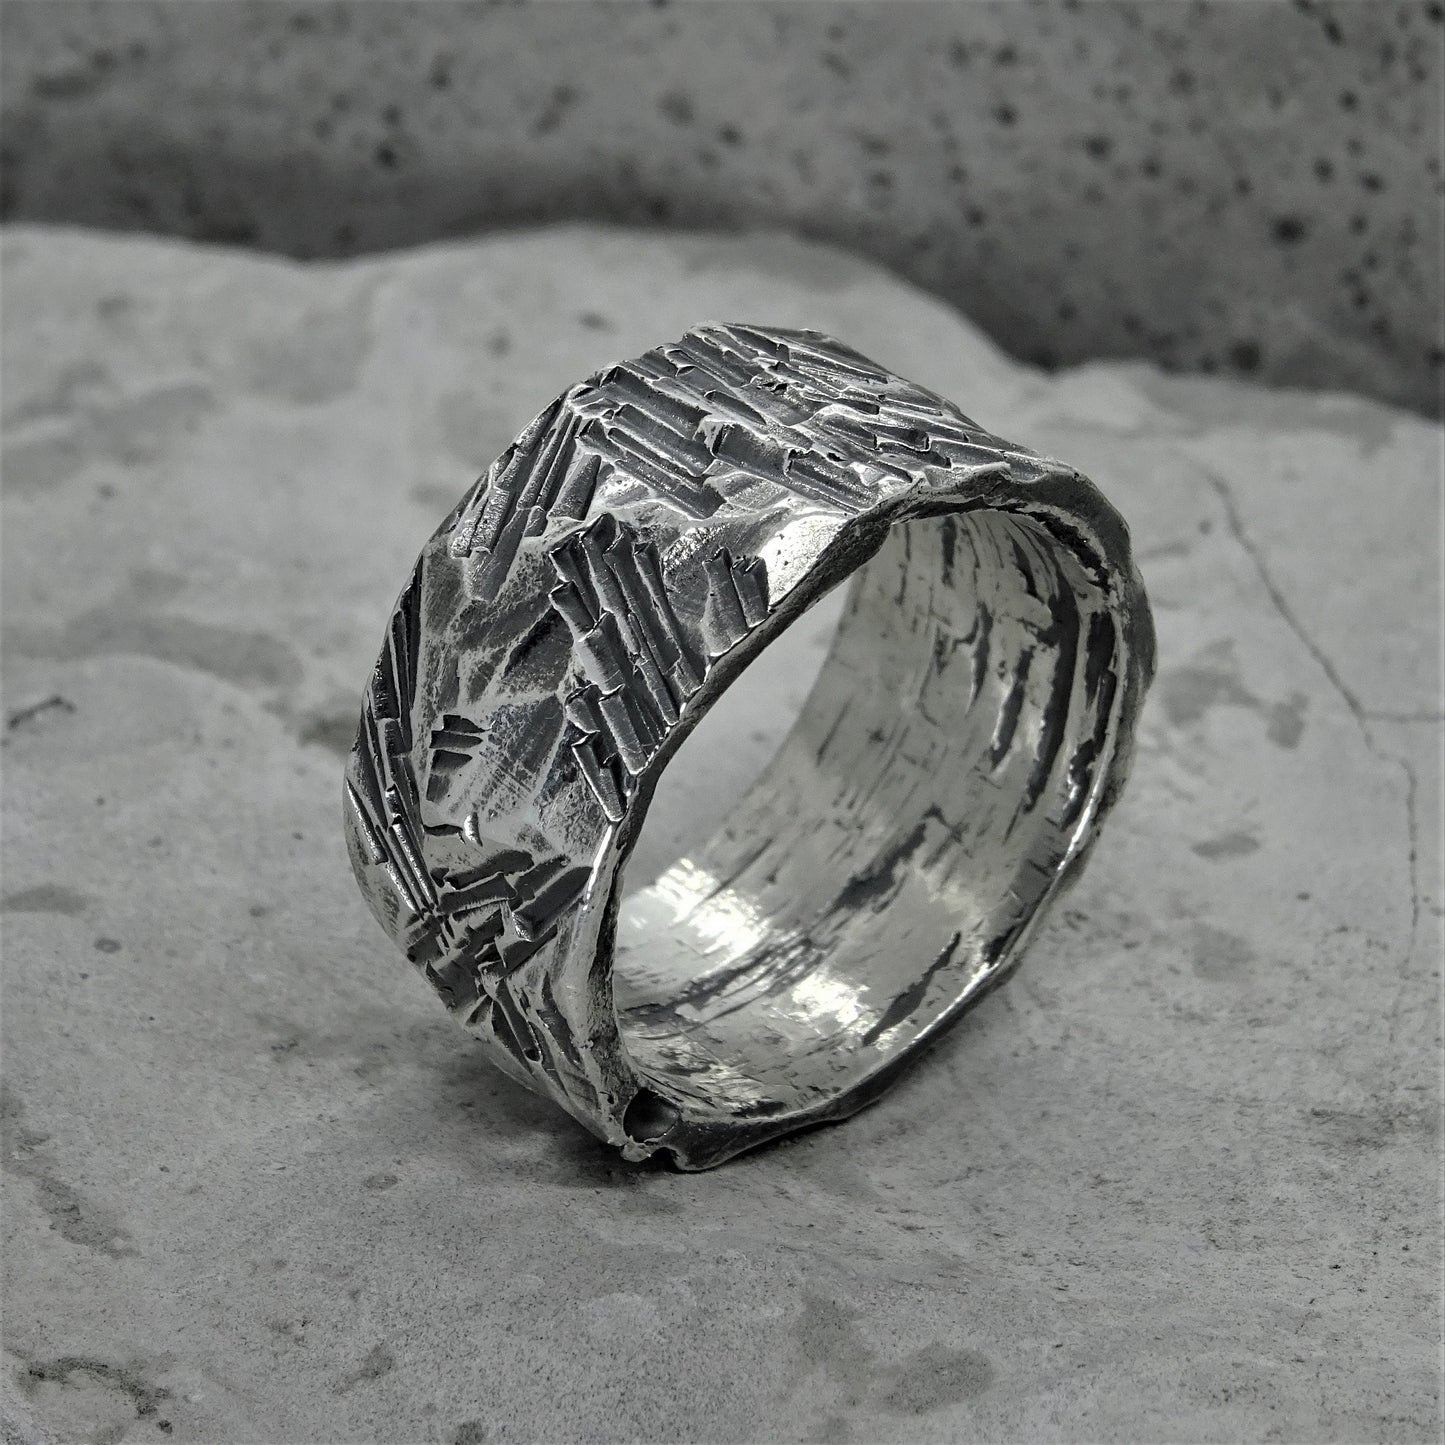 Silver stone ring- very wide band with authentic ornament Band rings Project50g 